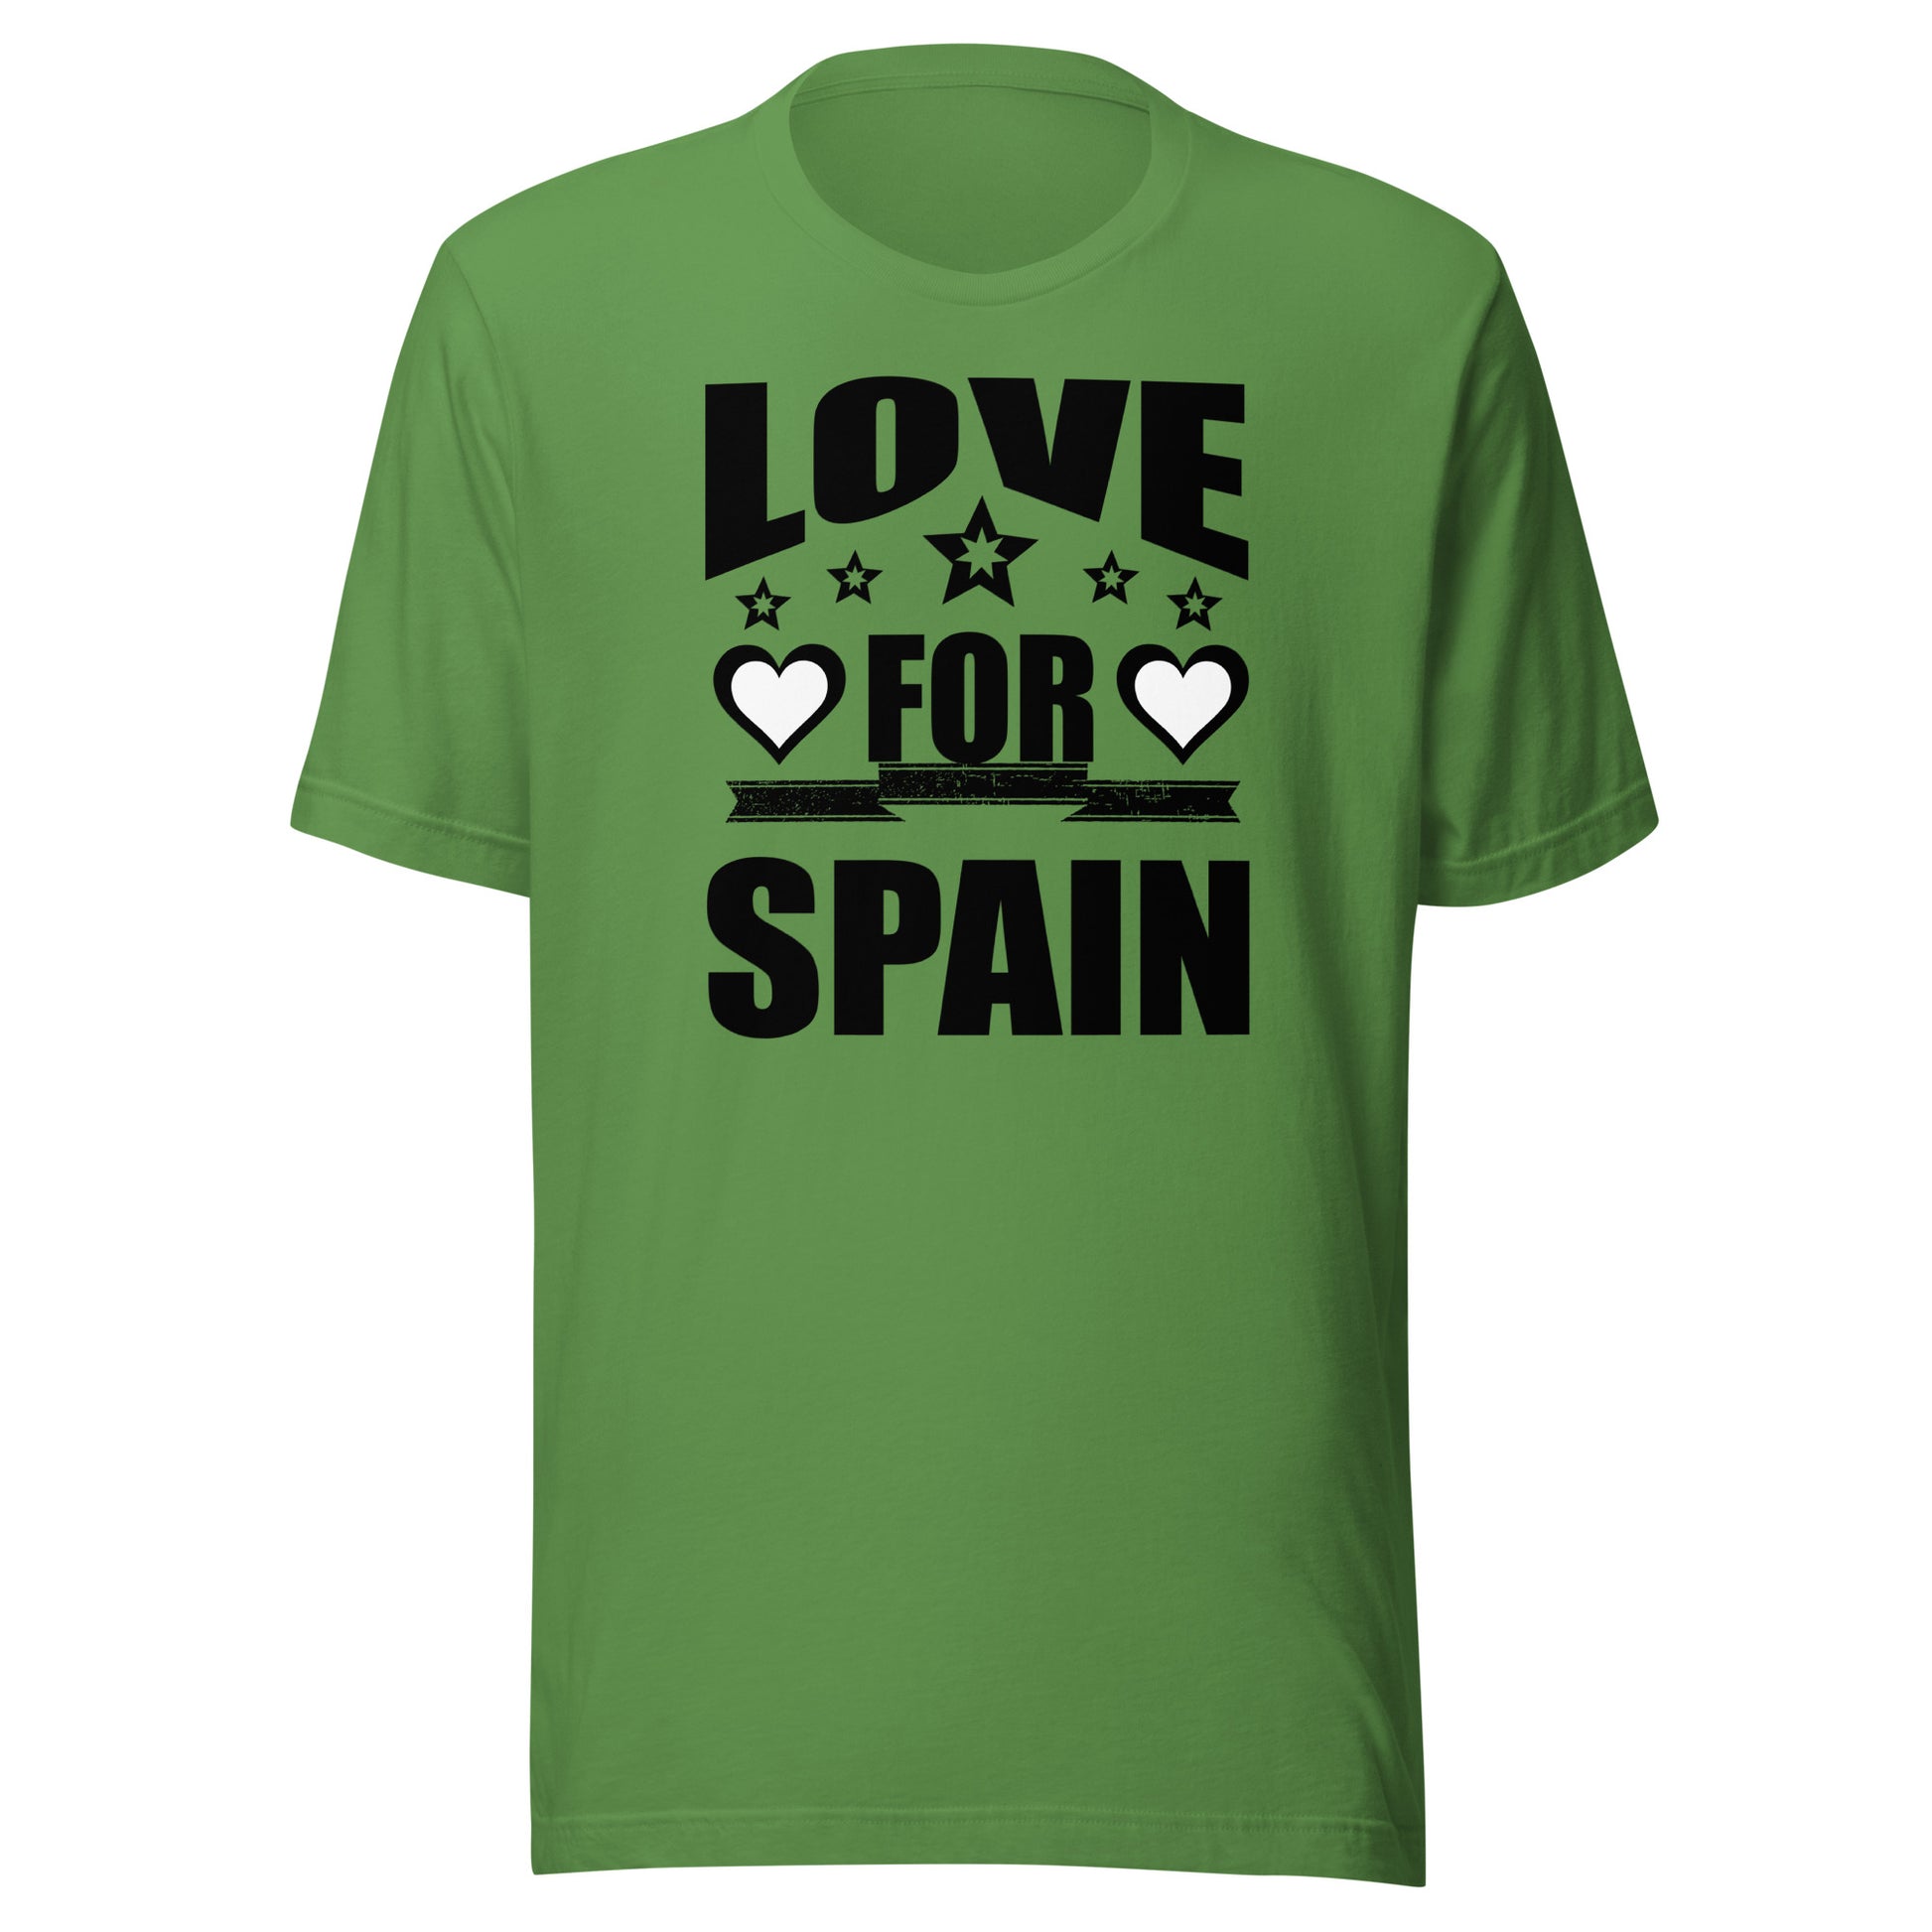 T-shirt for Spain Fans Green Color